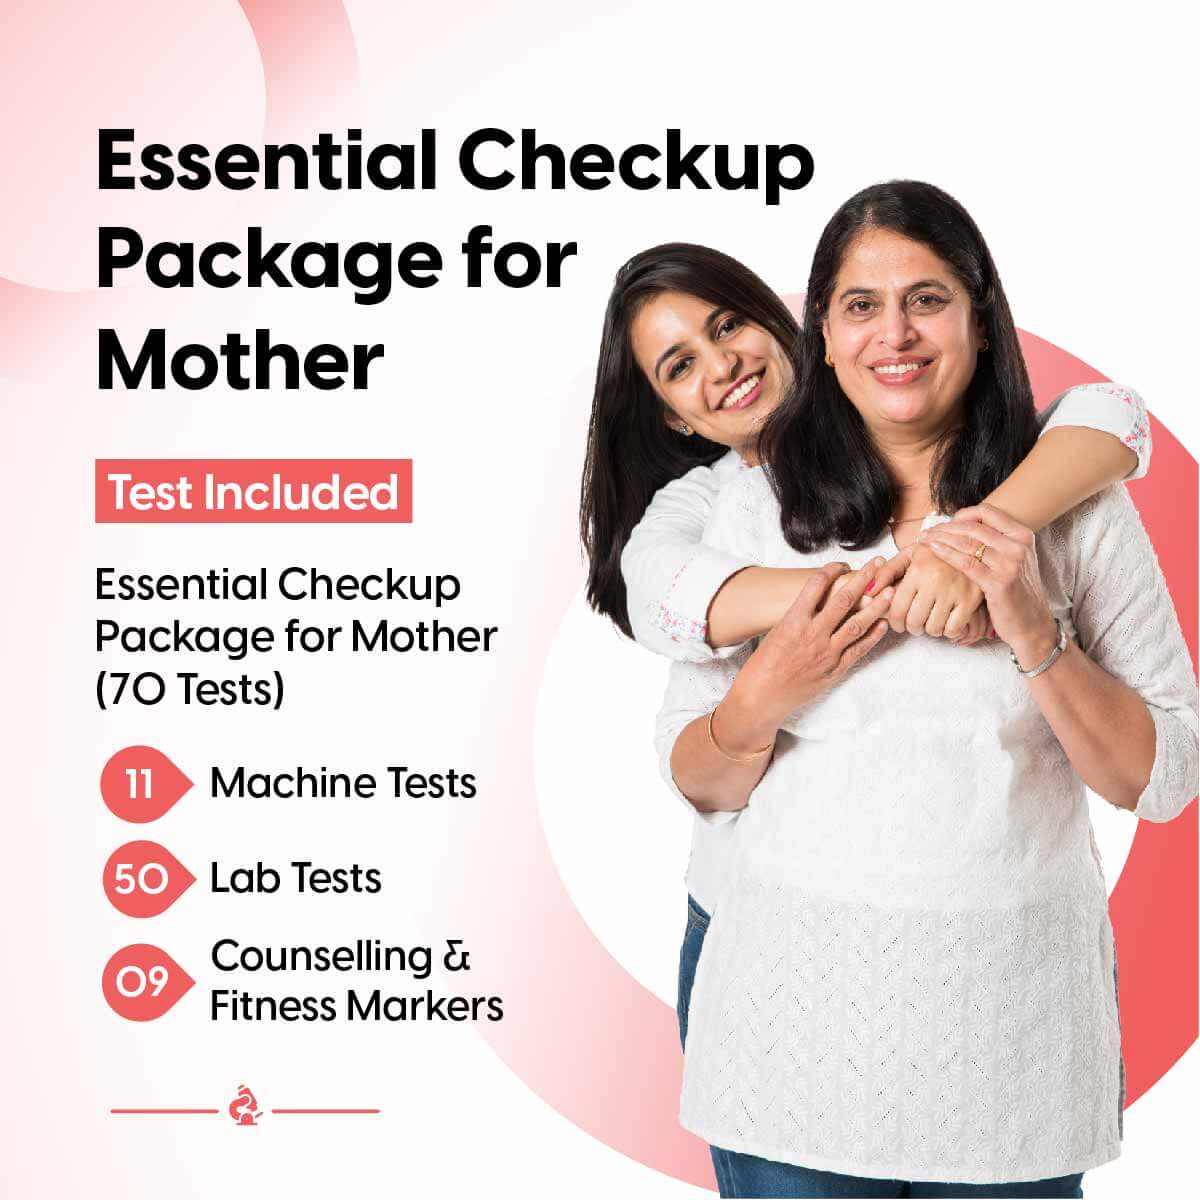 Essential Checkup Package for Mother